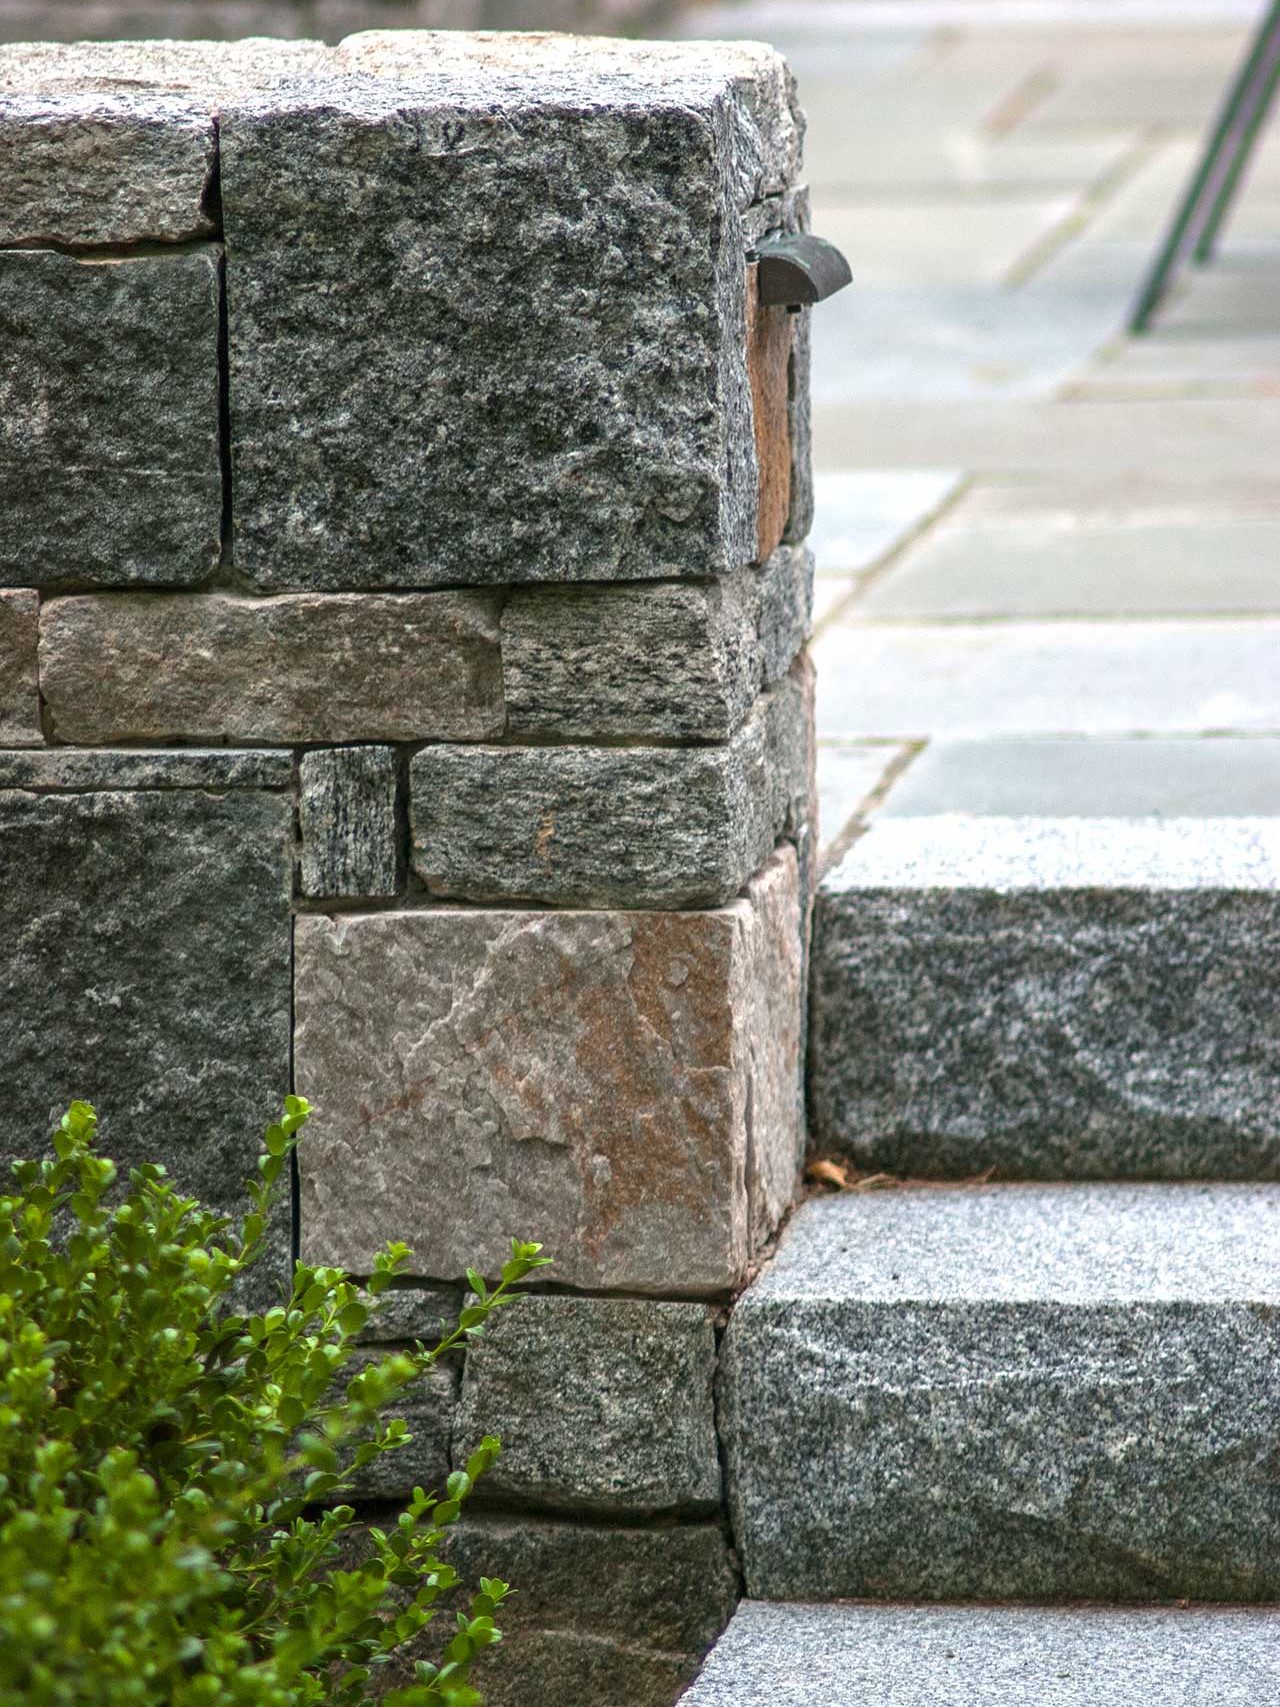 Wellesley, MA - Integrated wall lighting to illuminate the path and these granite steps.